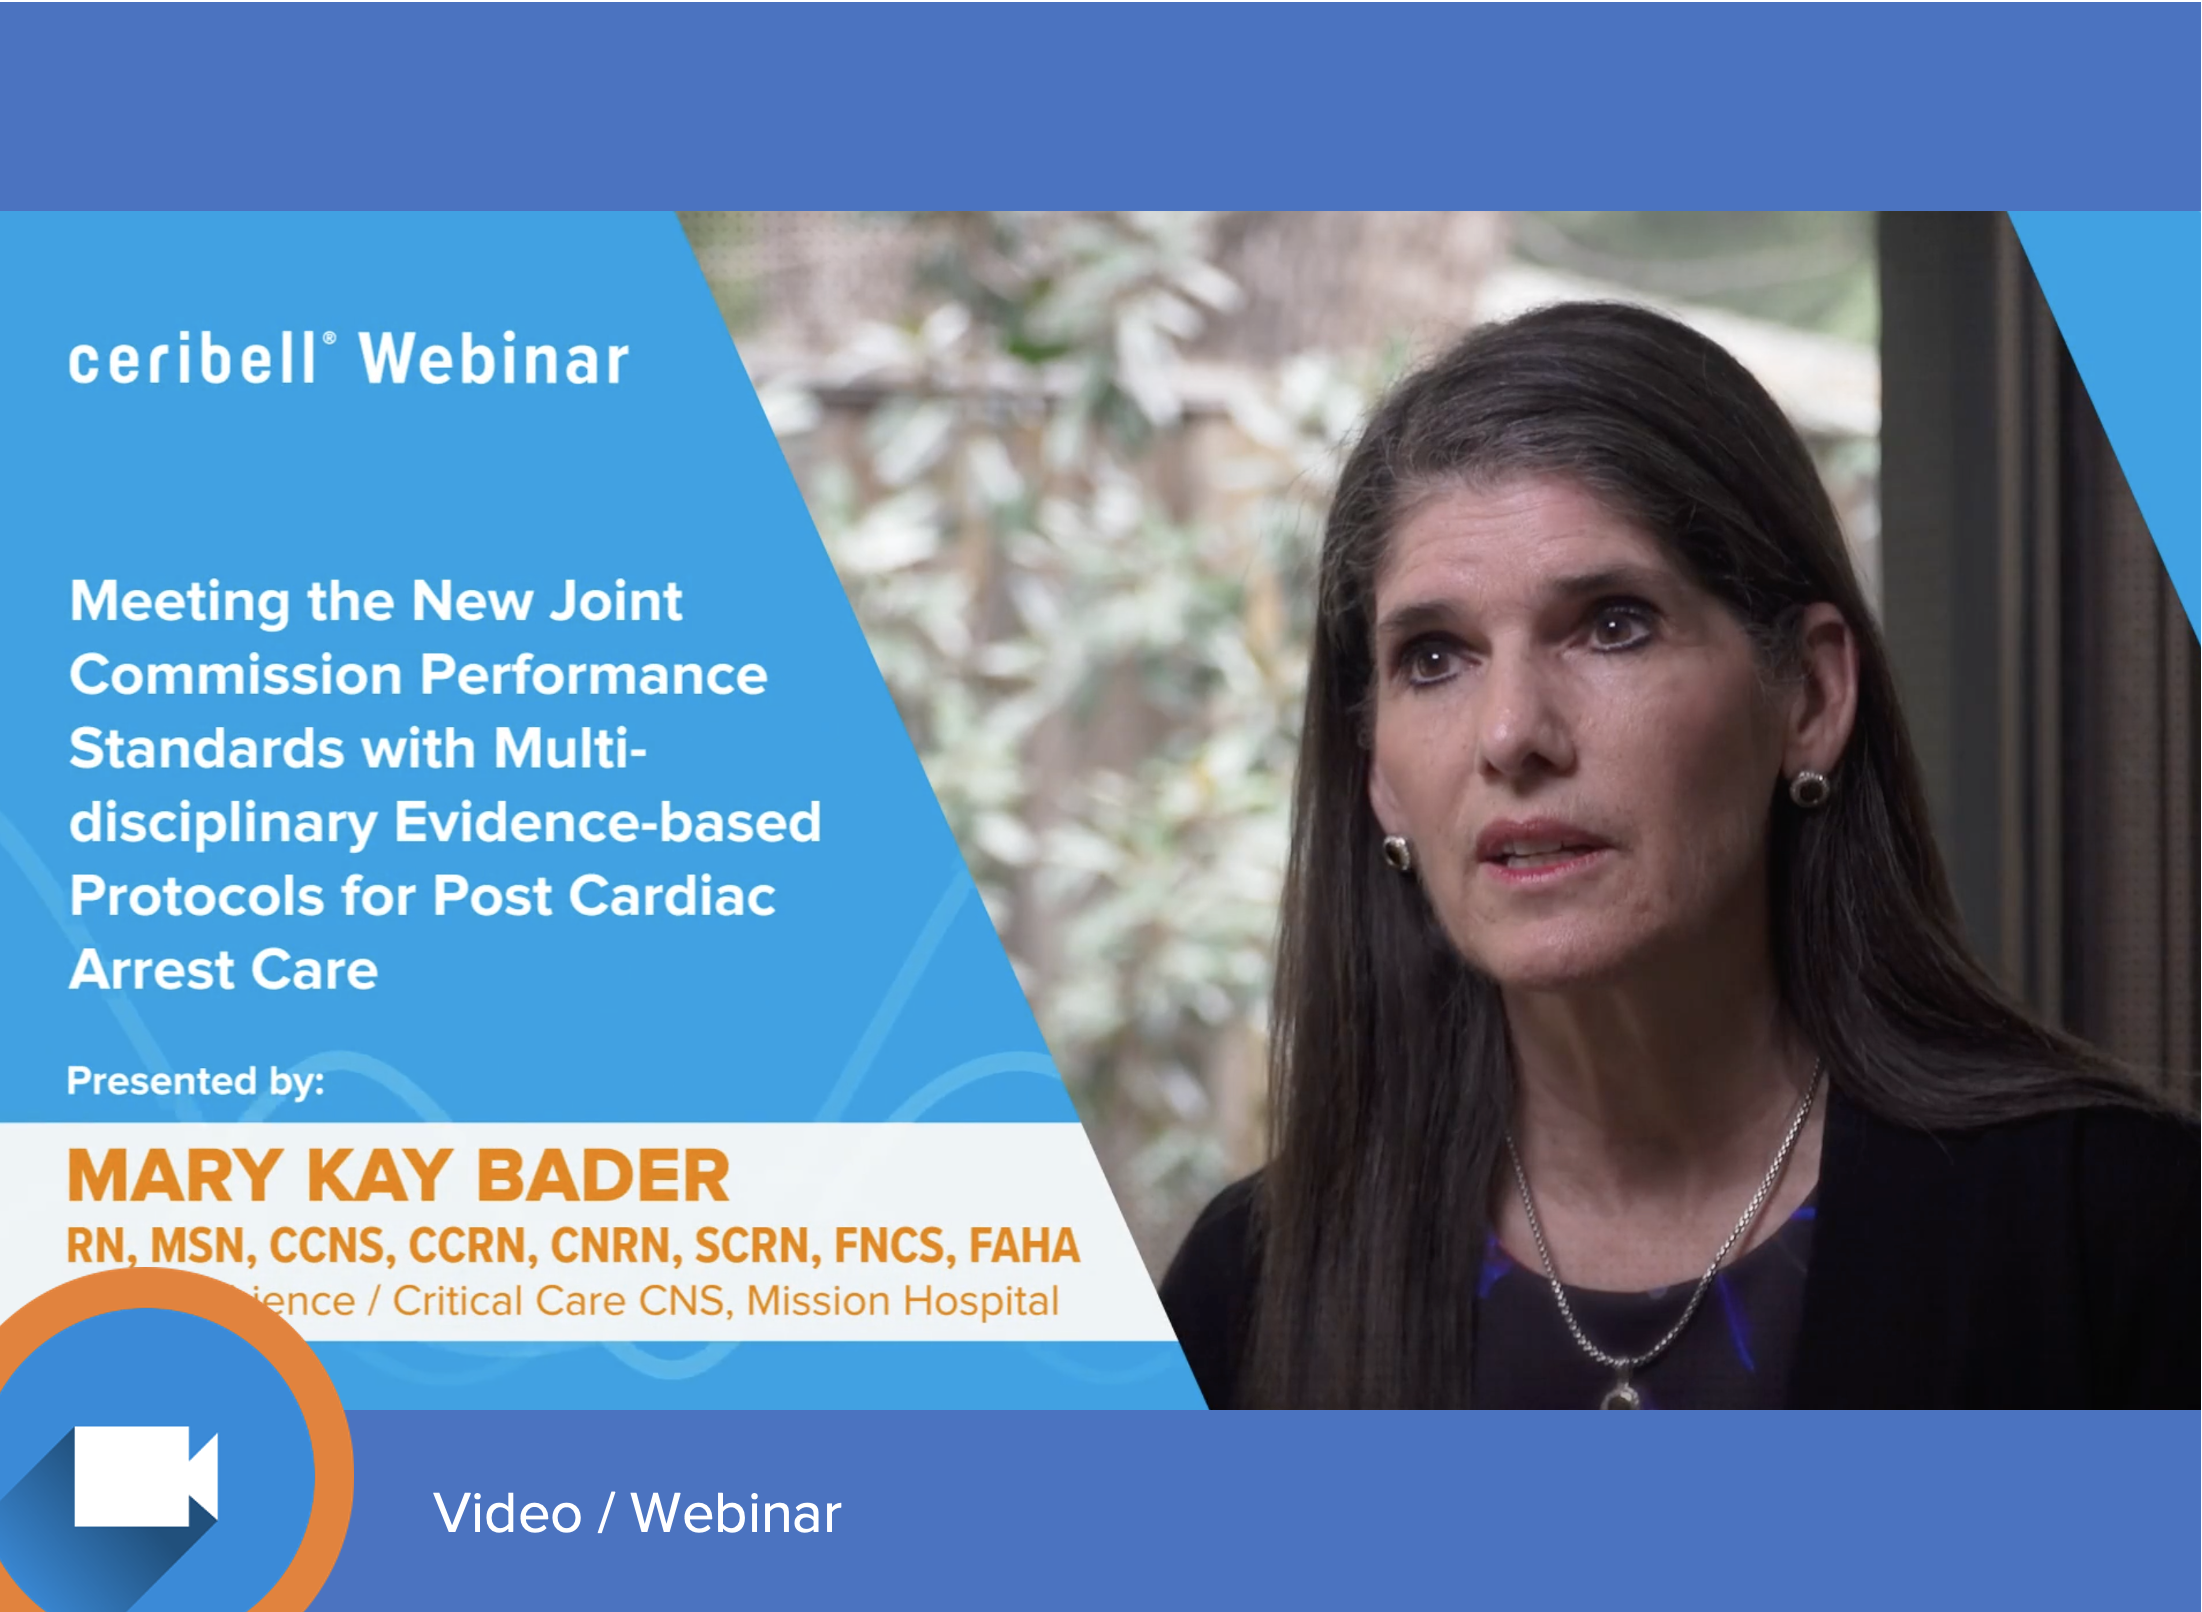 Webinar: Meeting the New Joint Commission Performance Standards with Multi-disciplinary Evidence-based Protocols for Post Cardiac Arrest Care